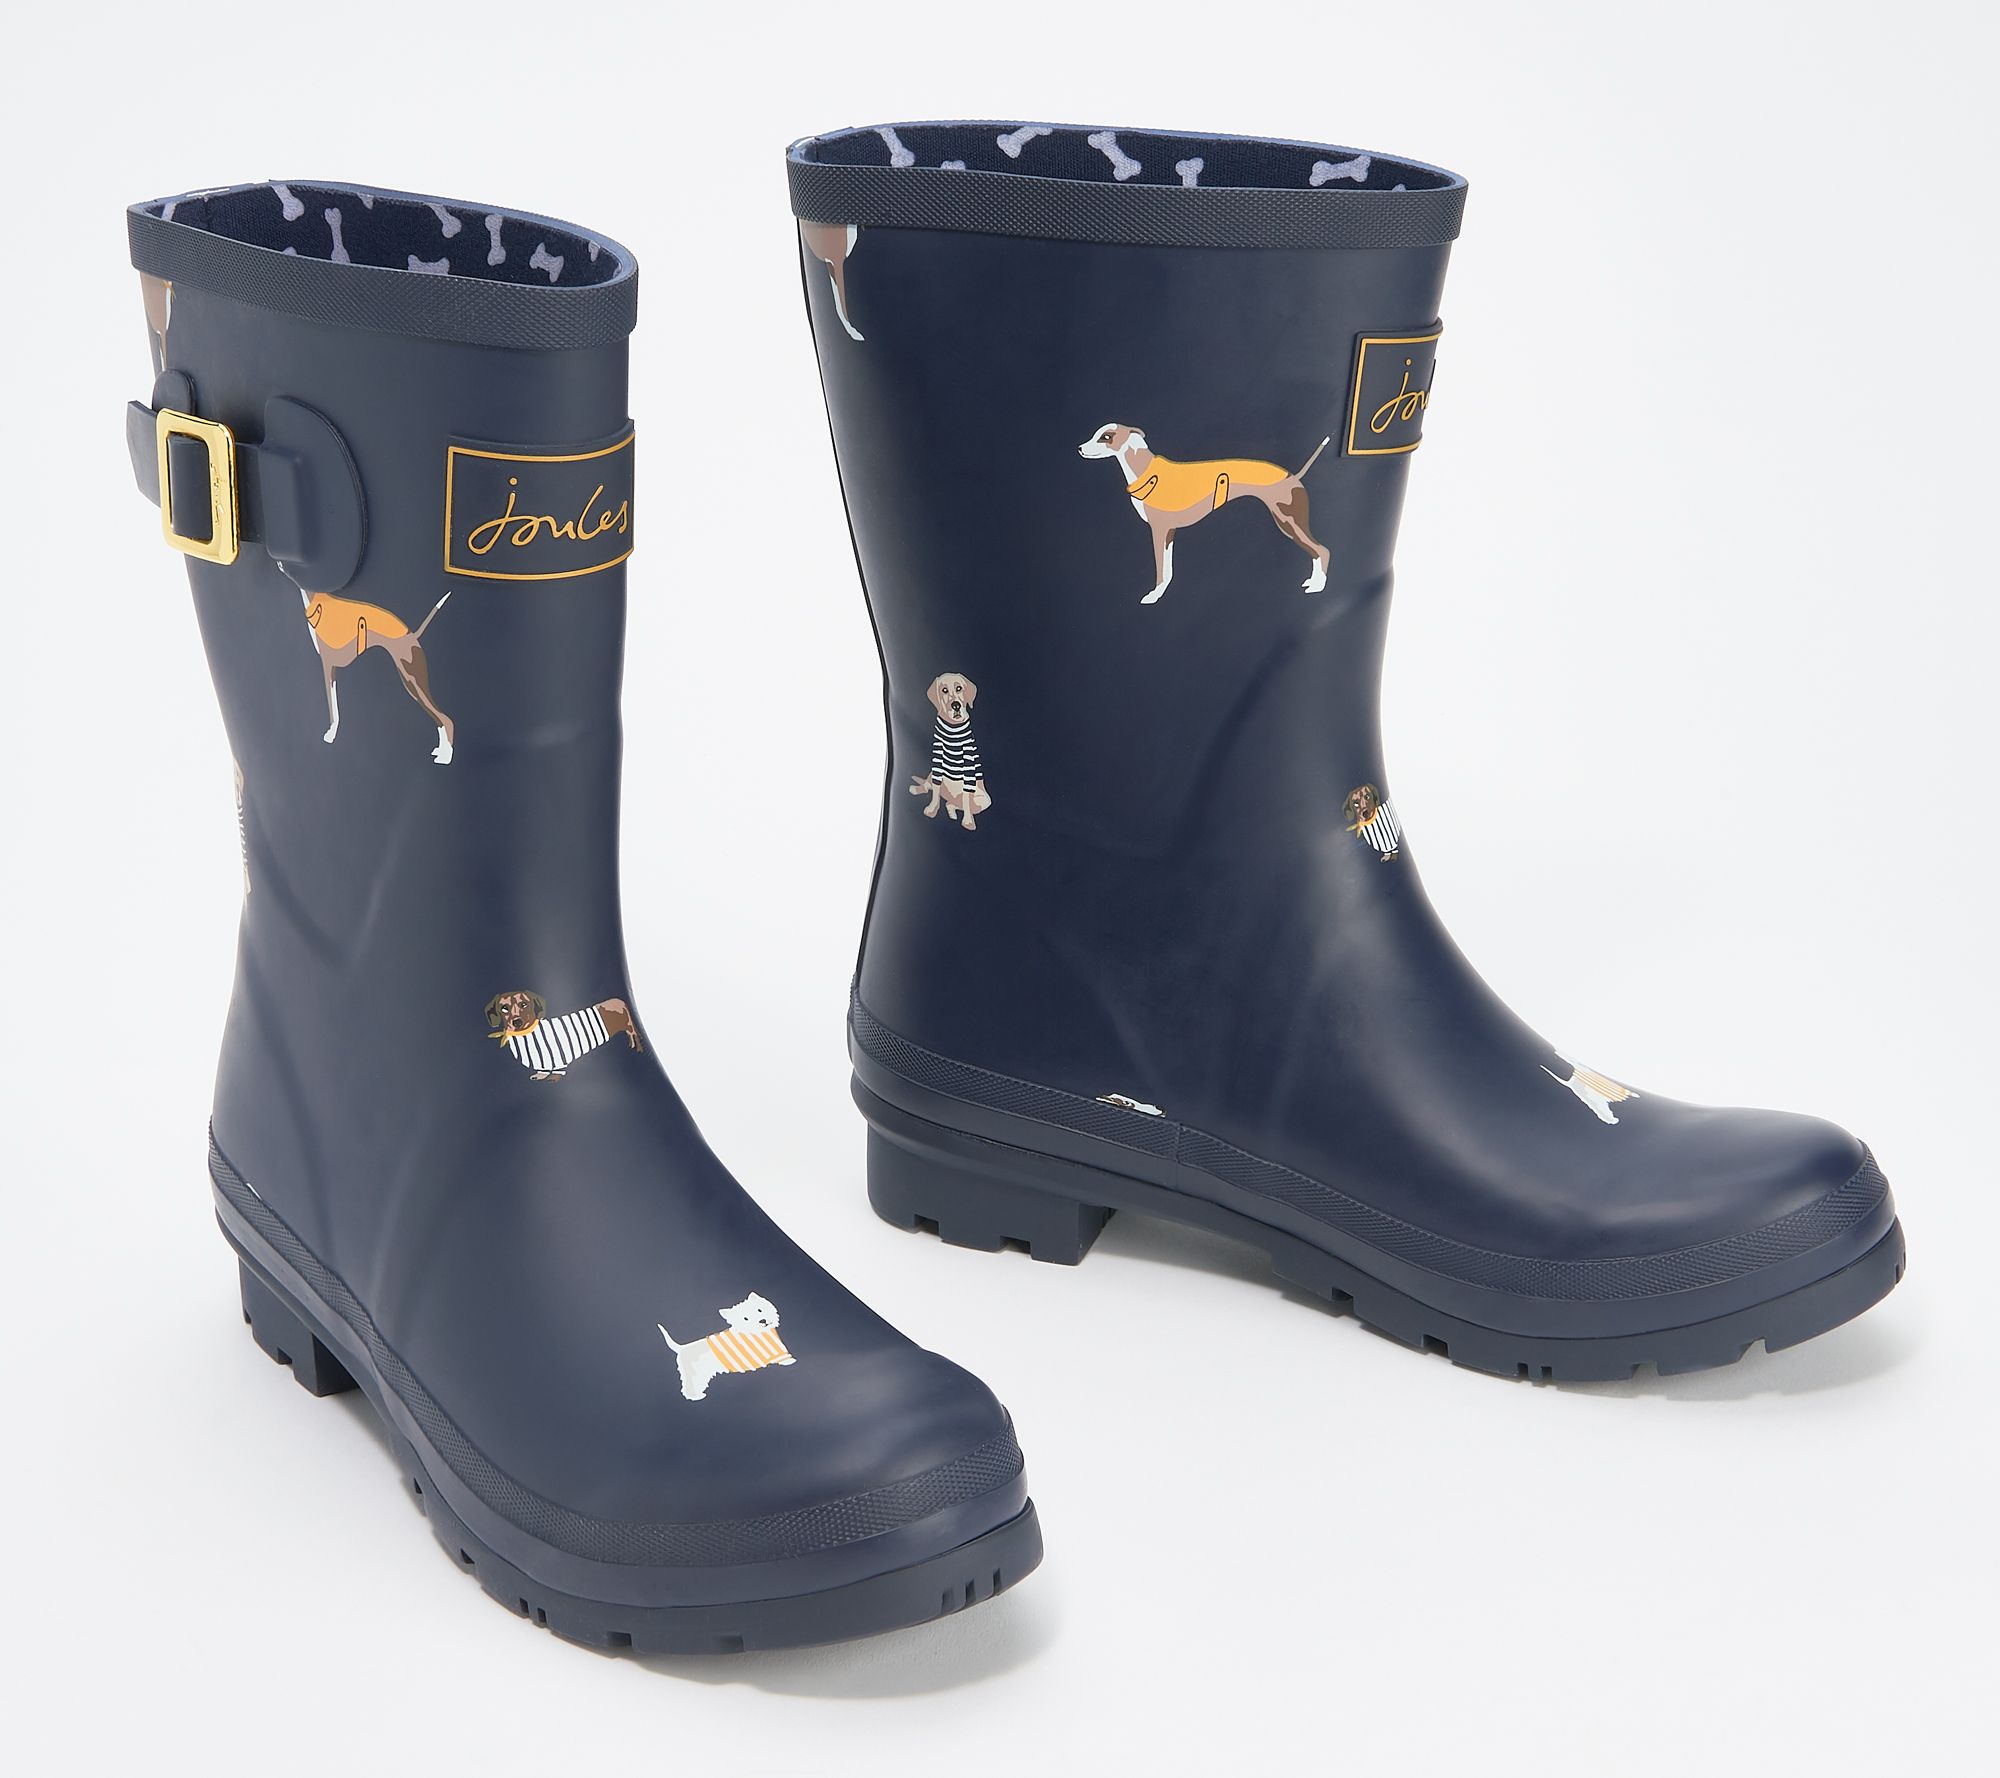 Joules Mid Rain Boots - Molly Welly 